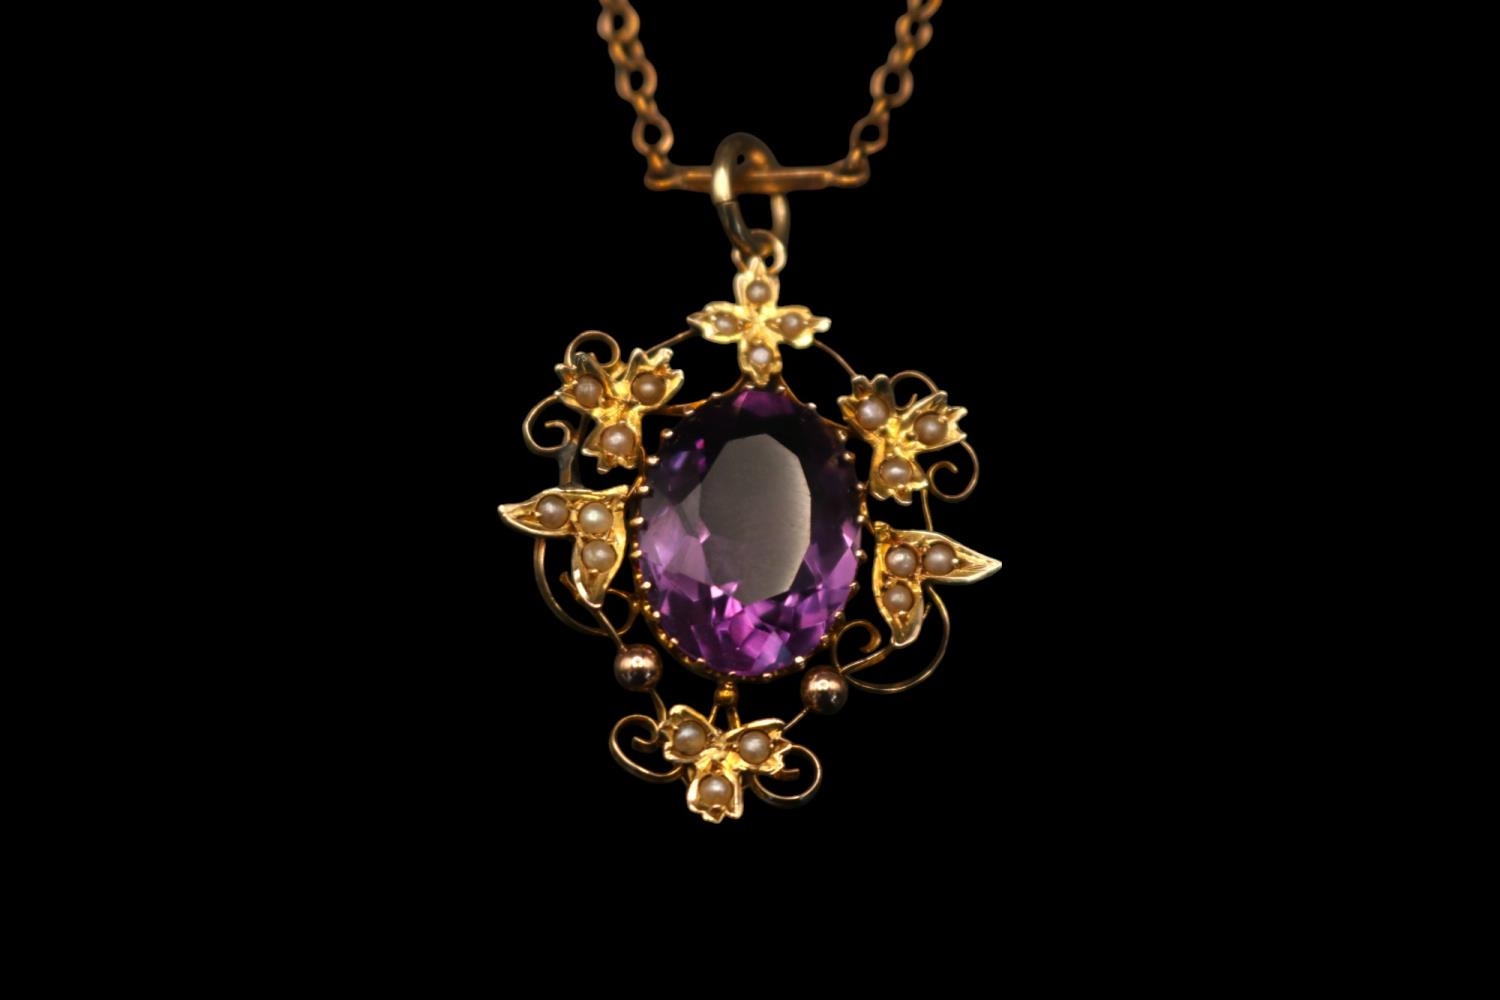 9ct Gold Edwardian Oval Amethyst Pendant with Foliate seed pearl setting. Oval Facetted Amethyst